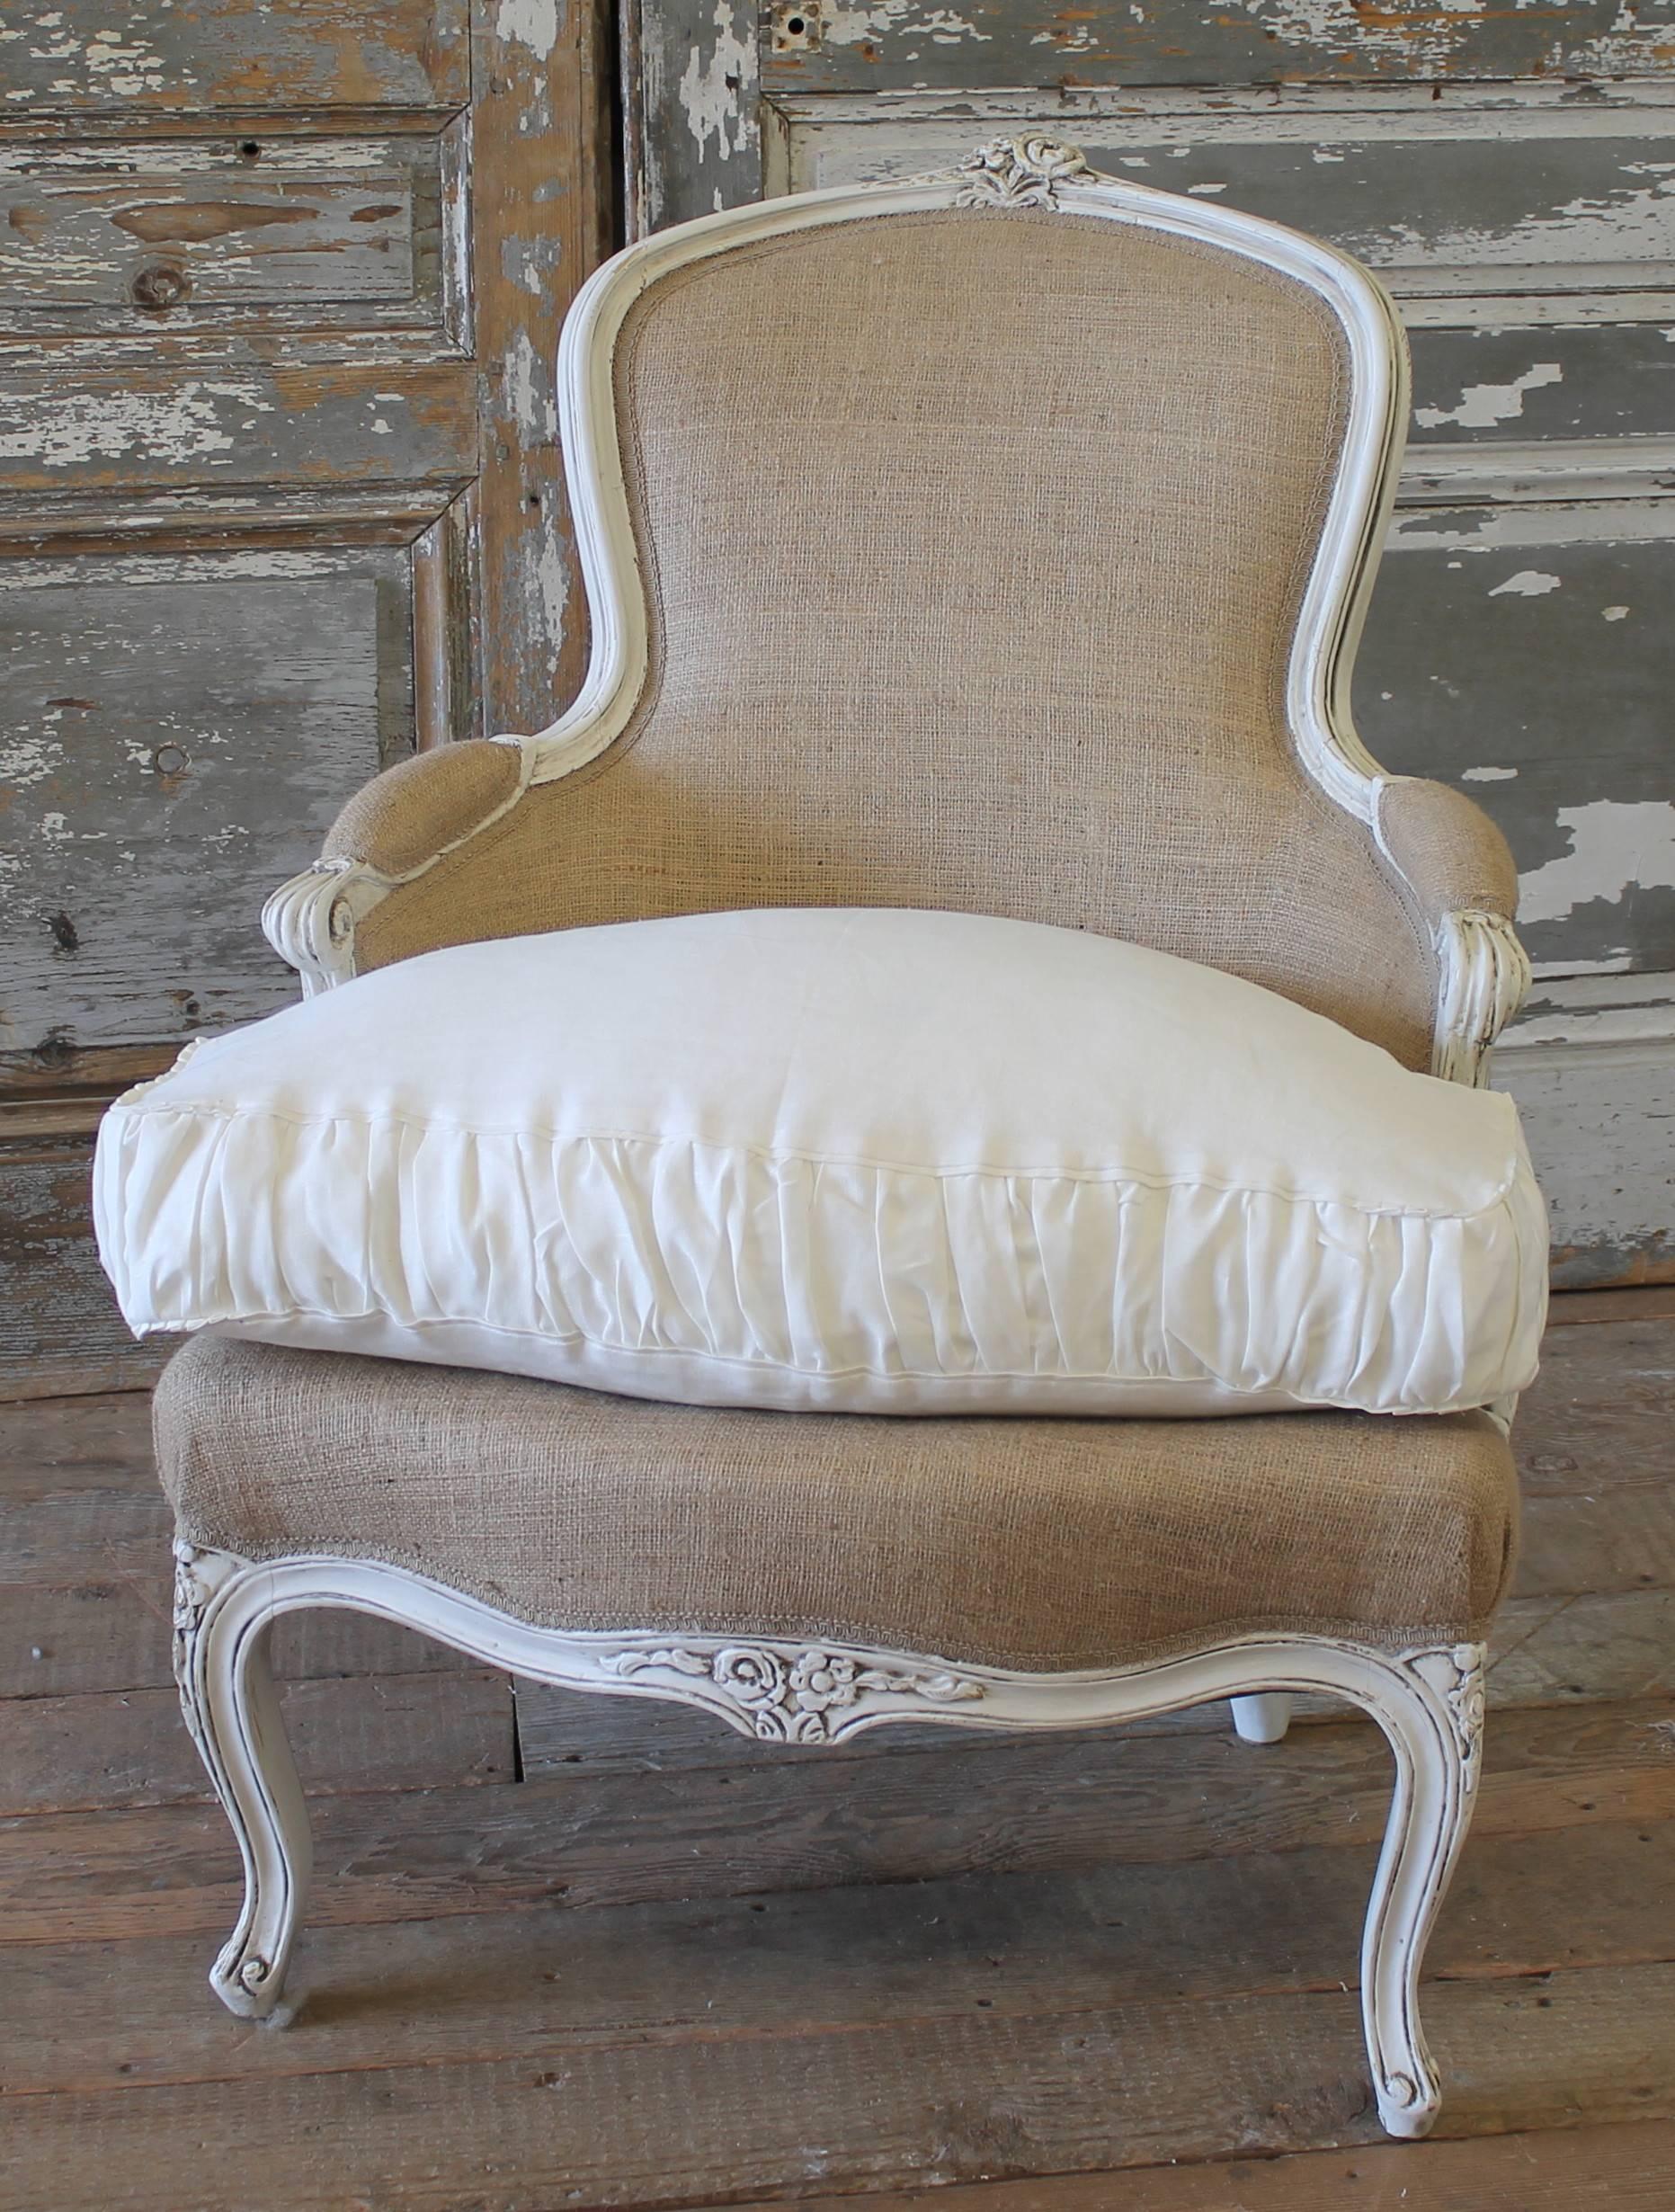 Beautiful French Country style chair, painted in our signature oyster white finish. A hand rubbed glazed patina has been added to give the look of a time worn finish. Delicate carvings and classic Louis XV style curved legs; we upholstered this in a